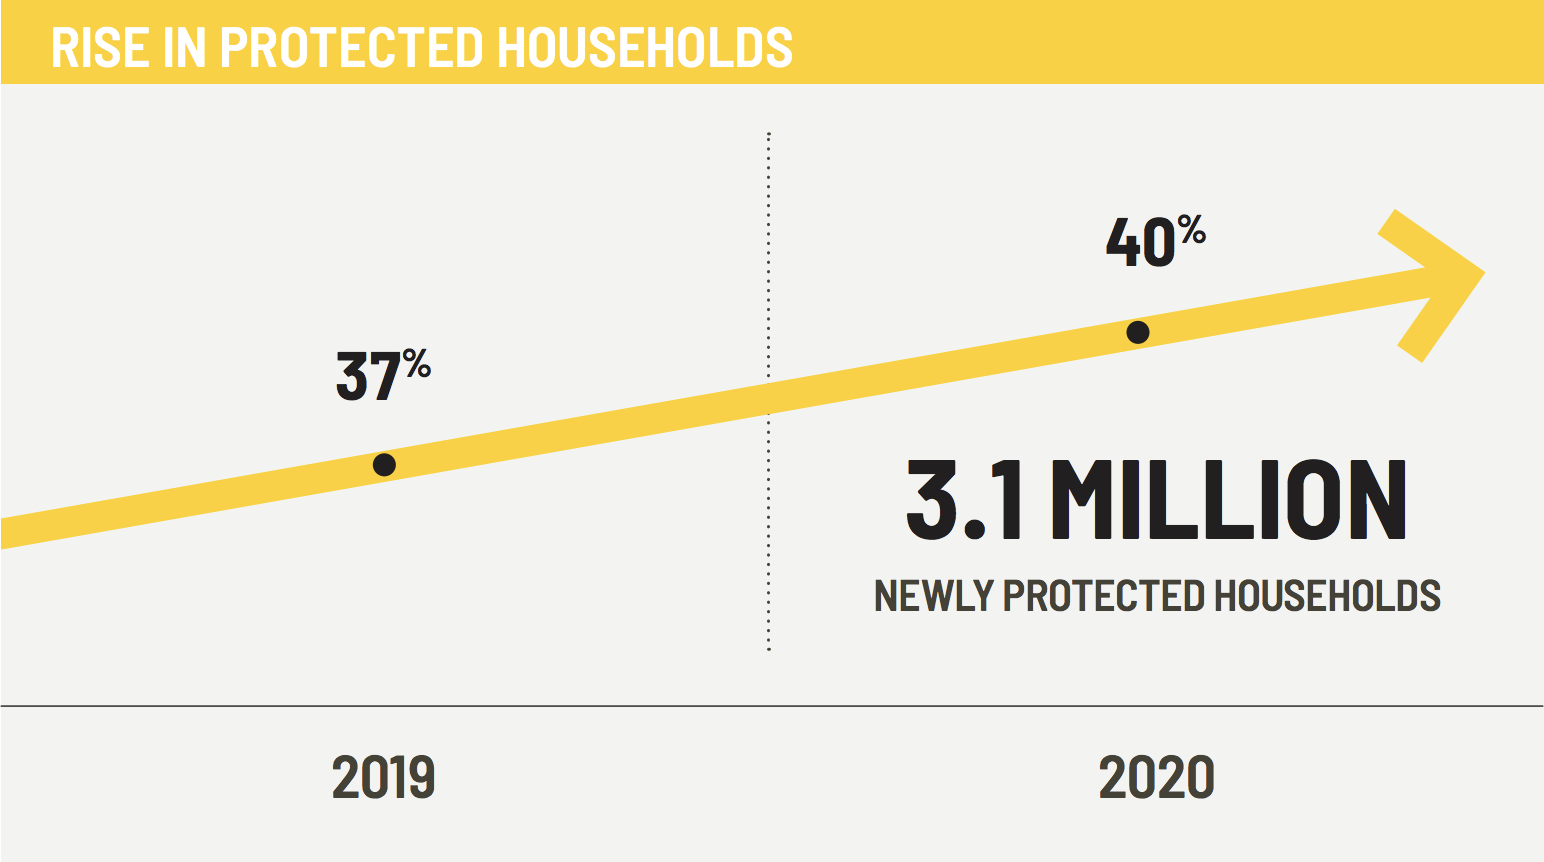 A chart showing the protected income increase from 2019 to 2020